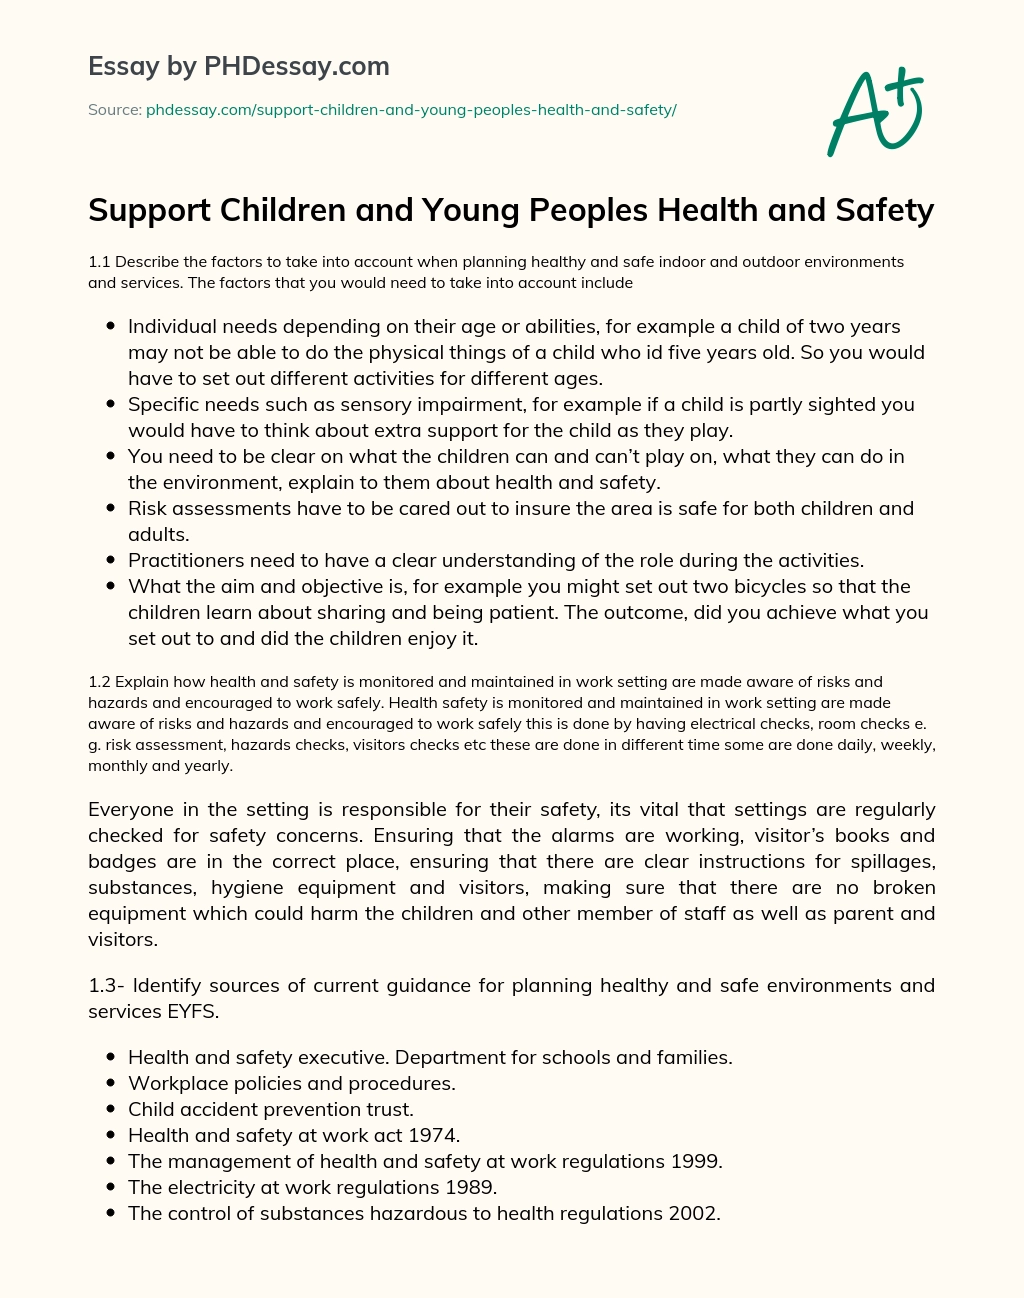 Support Children and Young Peoples Health and Safety essay